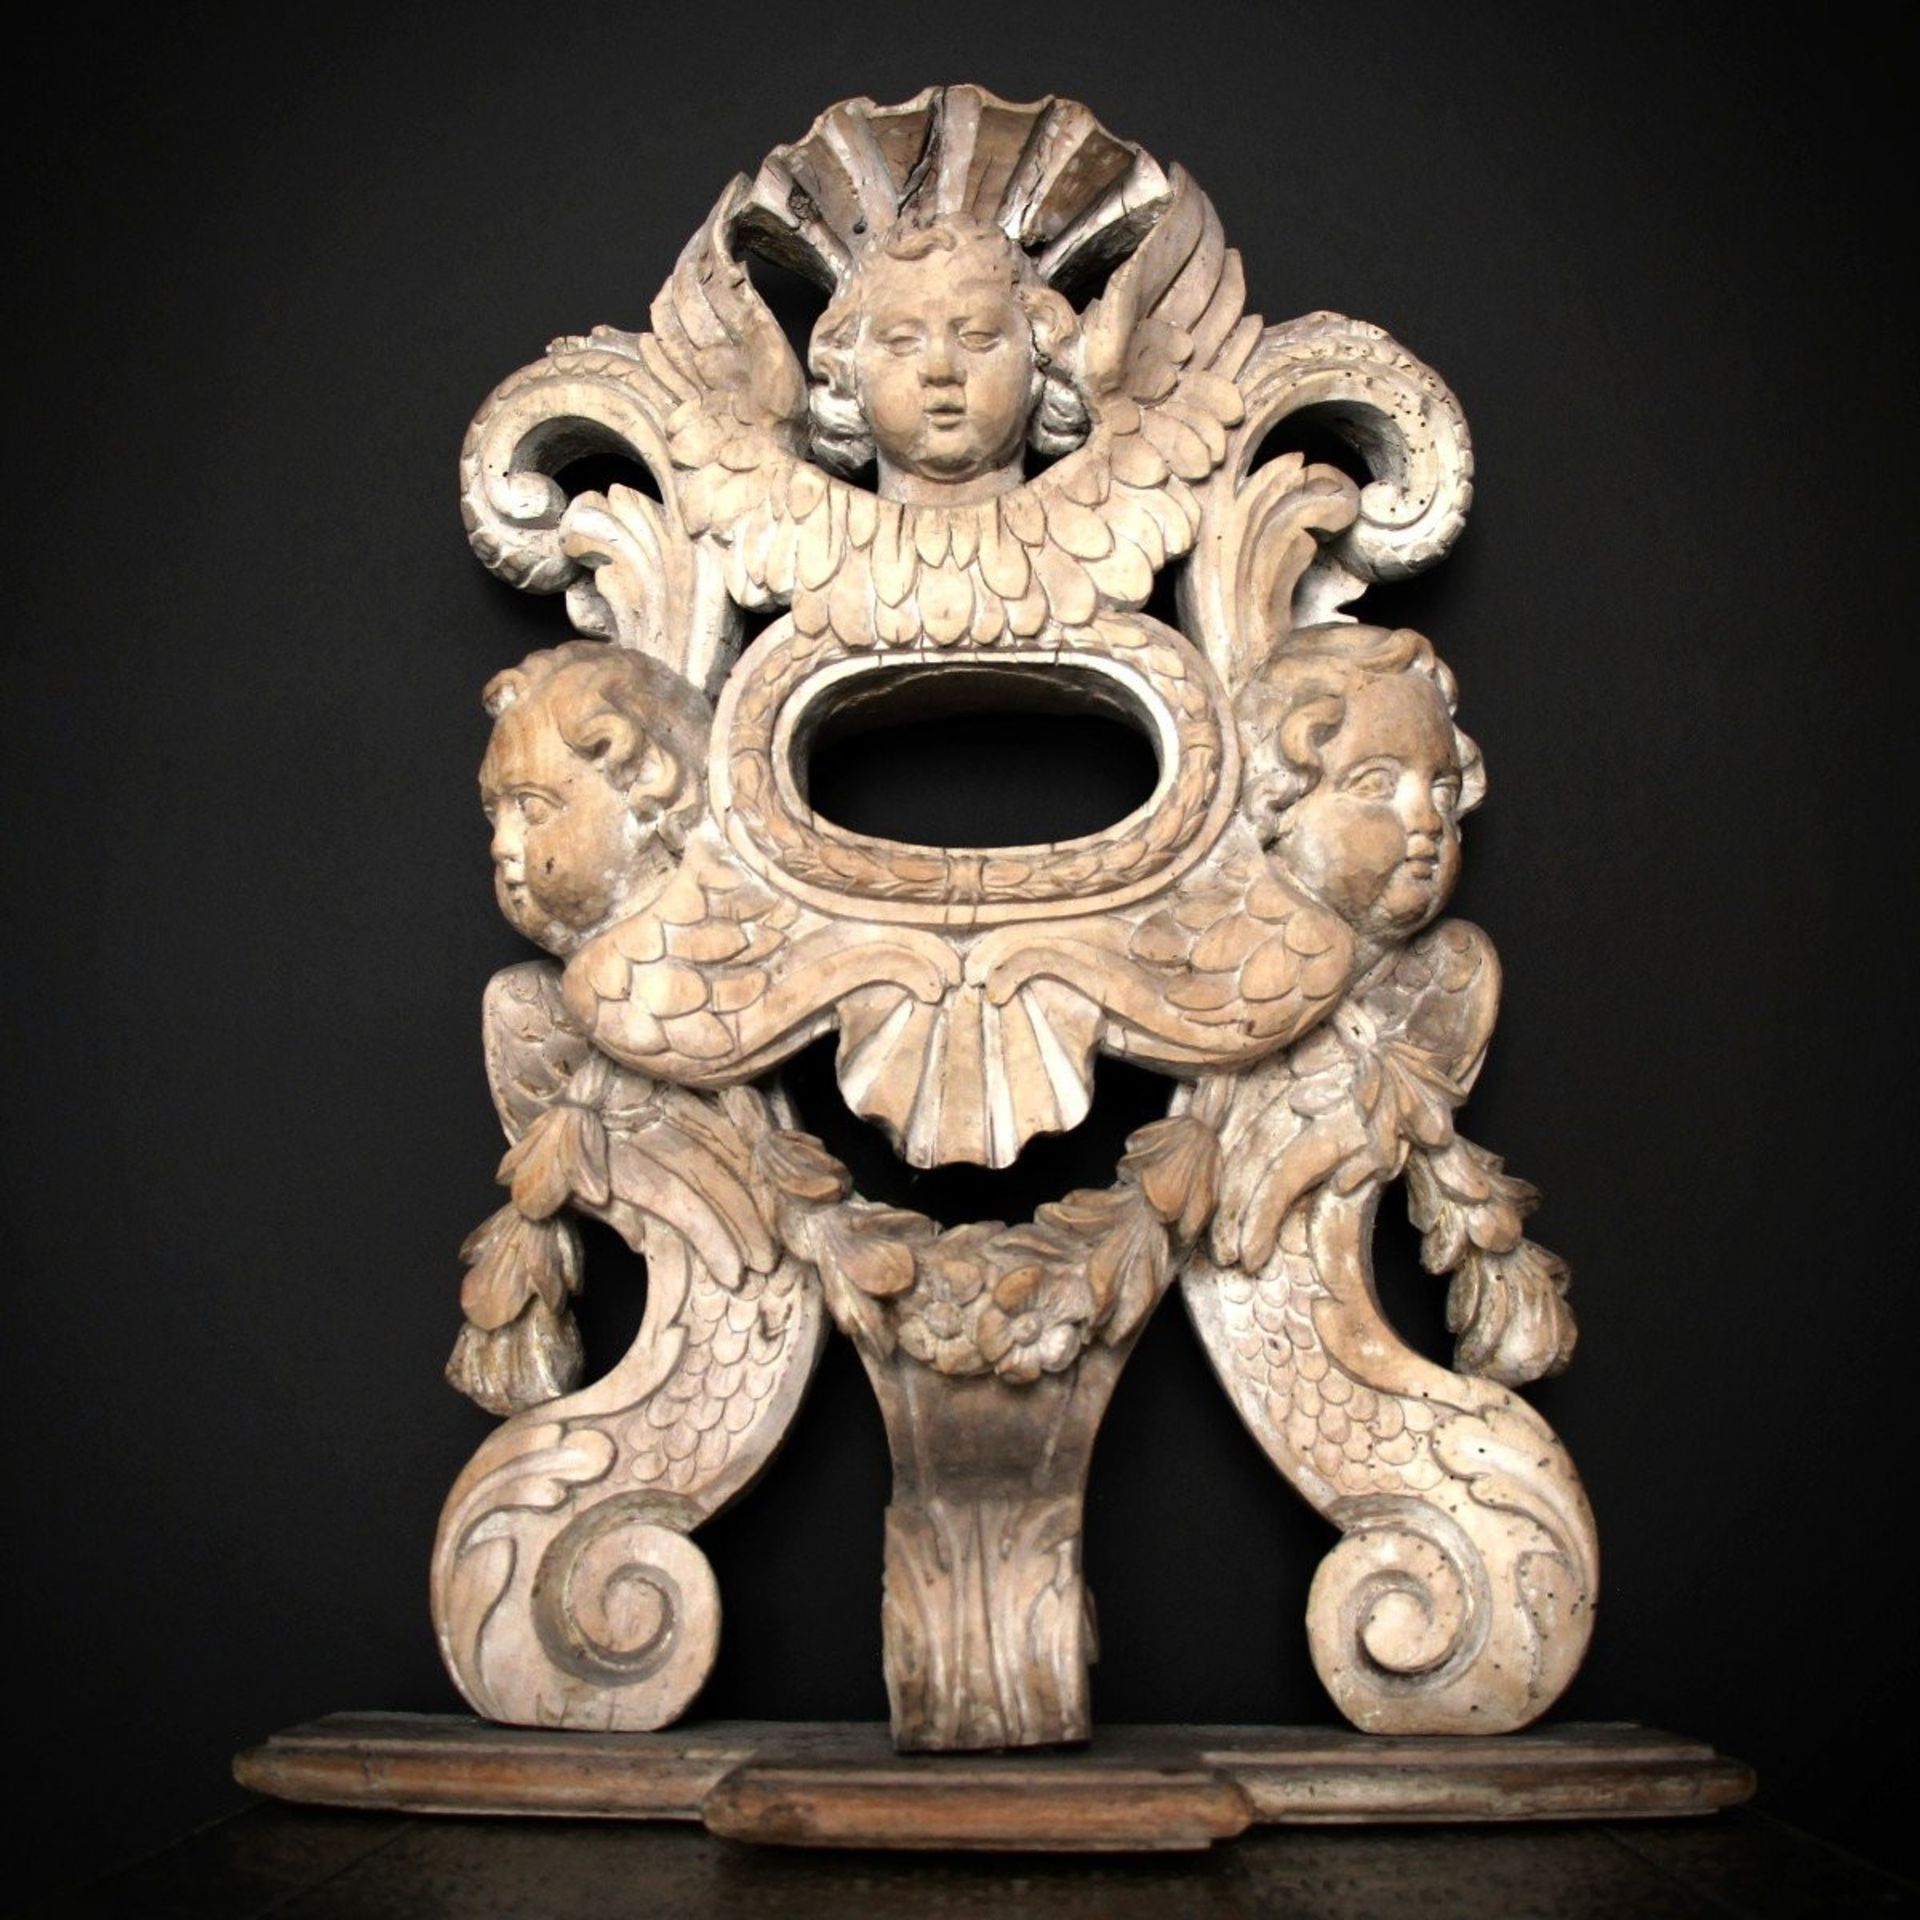 (BIDDING ONLY ON CARLOBONTE.BE) A Baroque richly carved limewood crucifix stand, H 56 cm